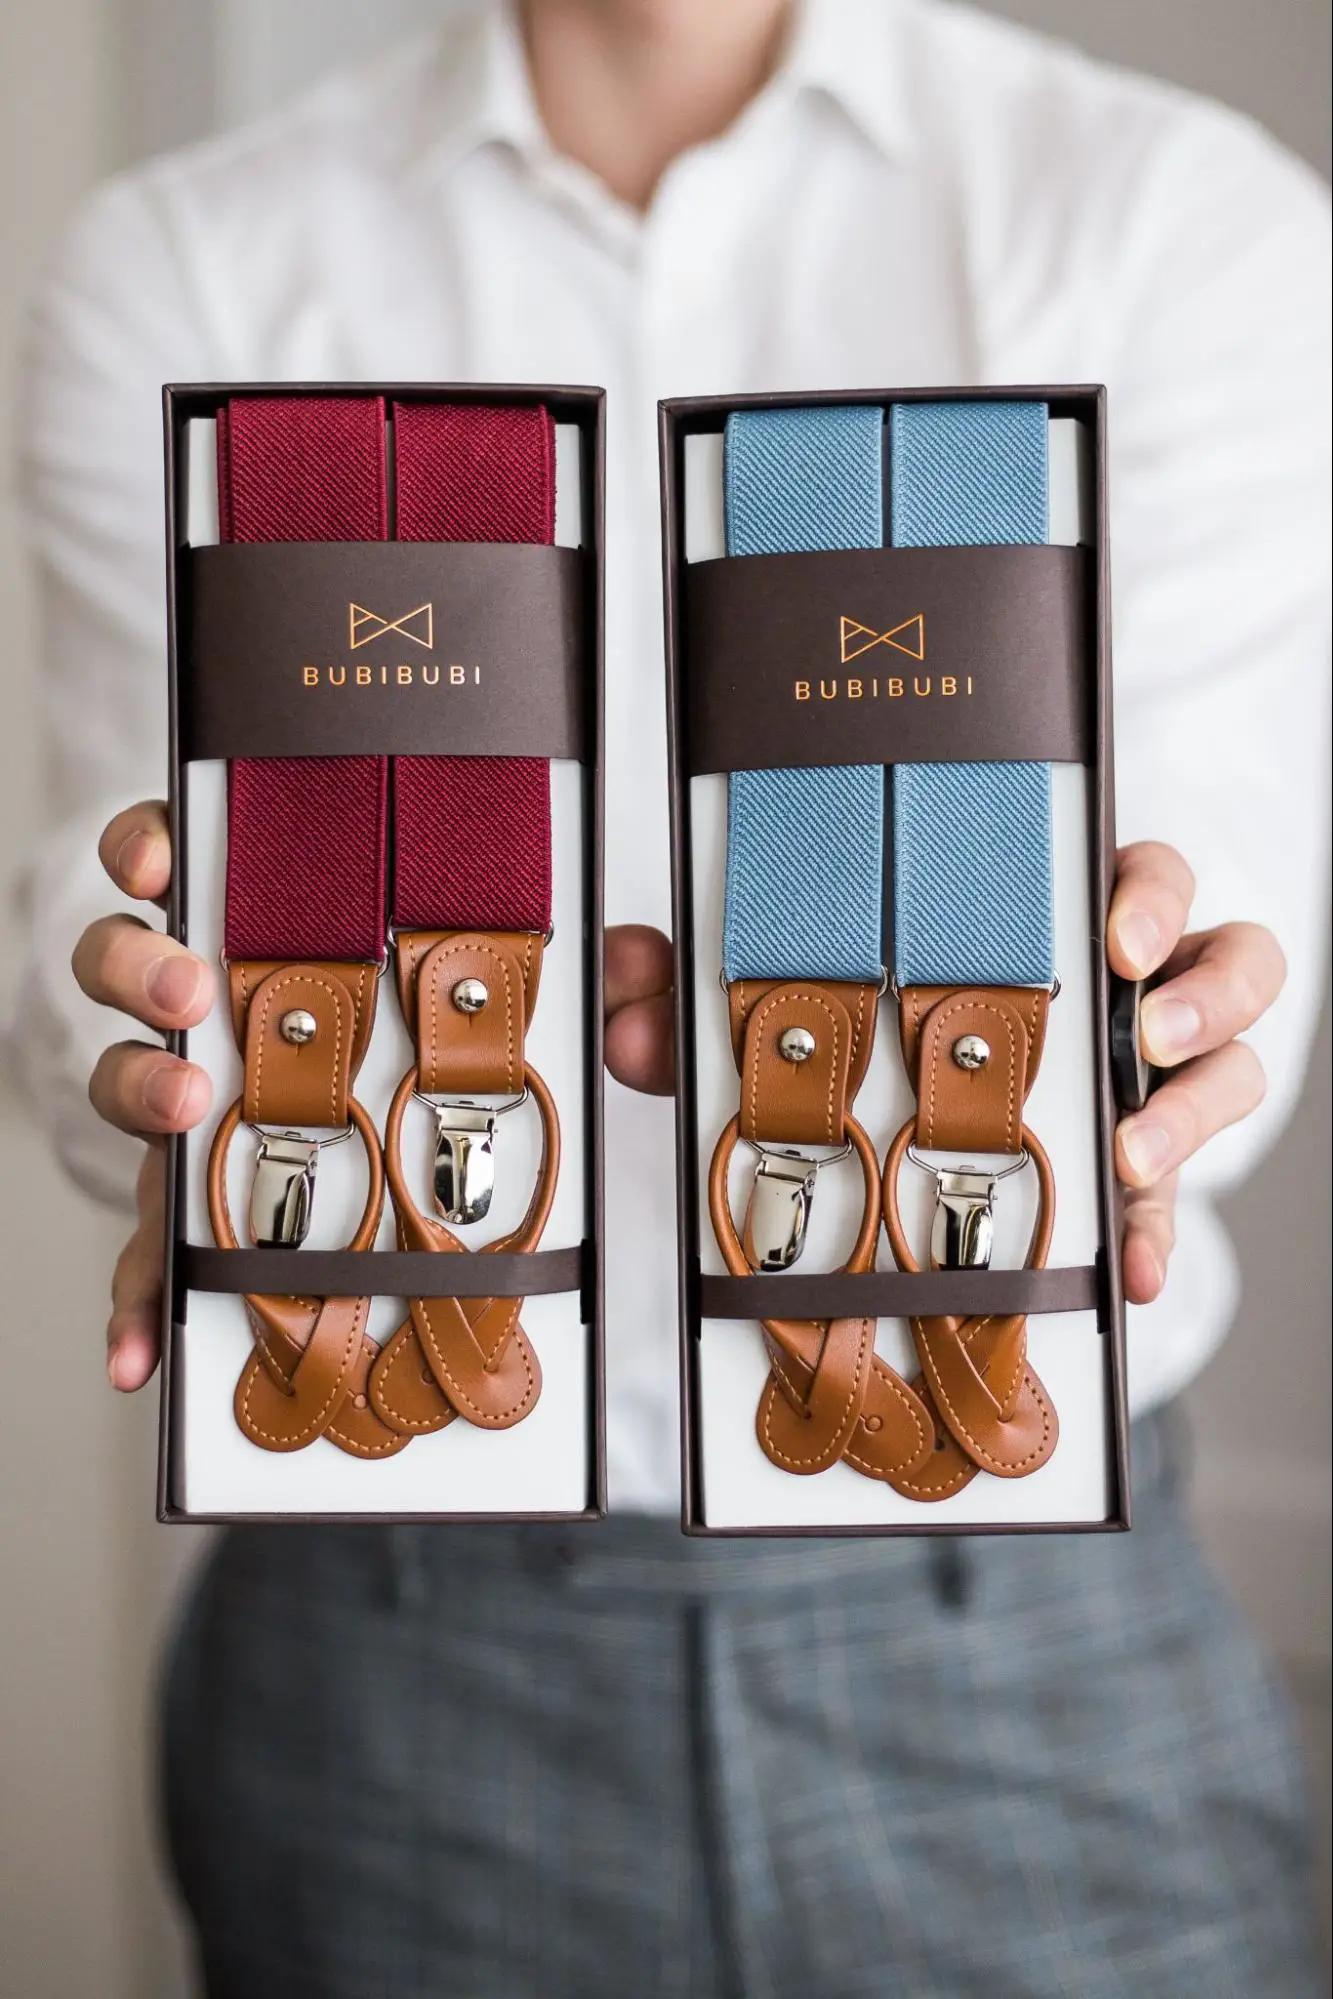 Groomsmen Gifts: Personalized and Memorable! Image